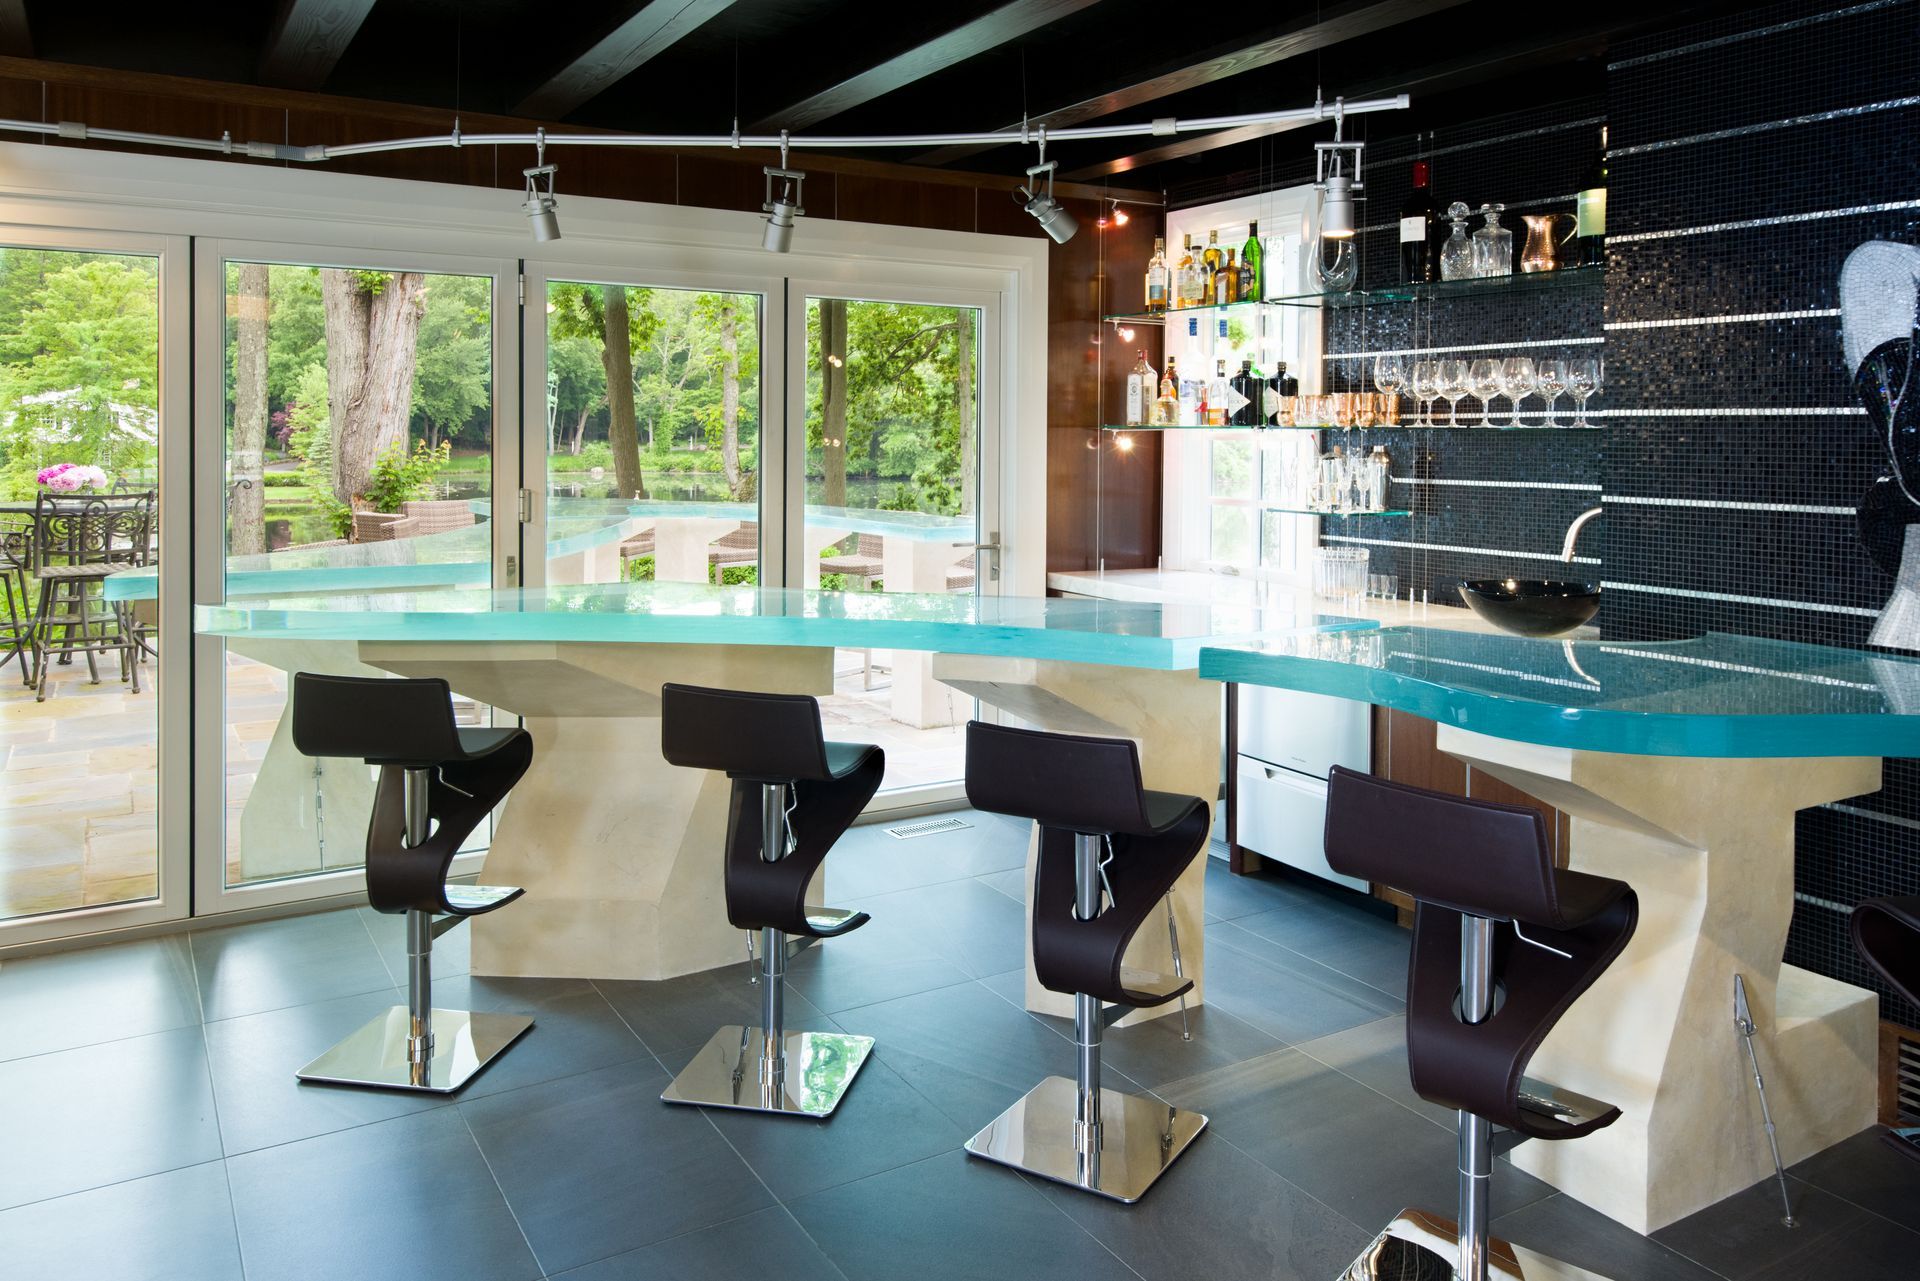 A curved thick glass countertop with texture inside the glass at a private residence.